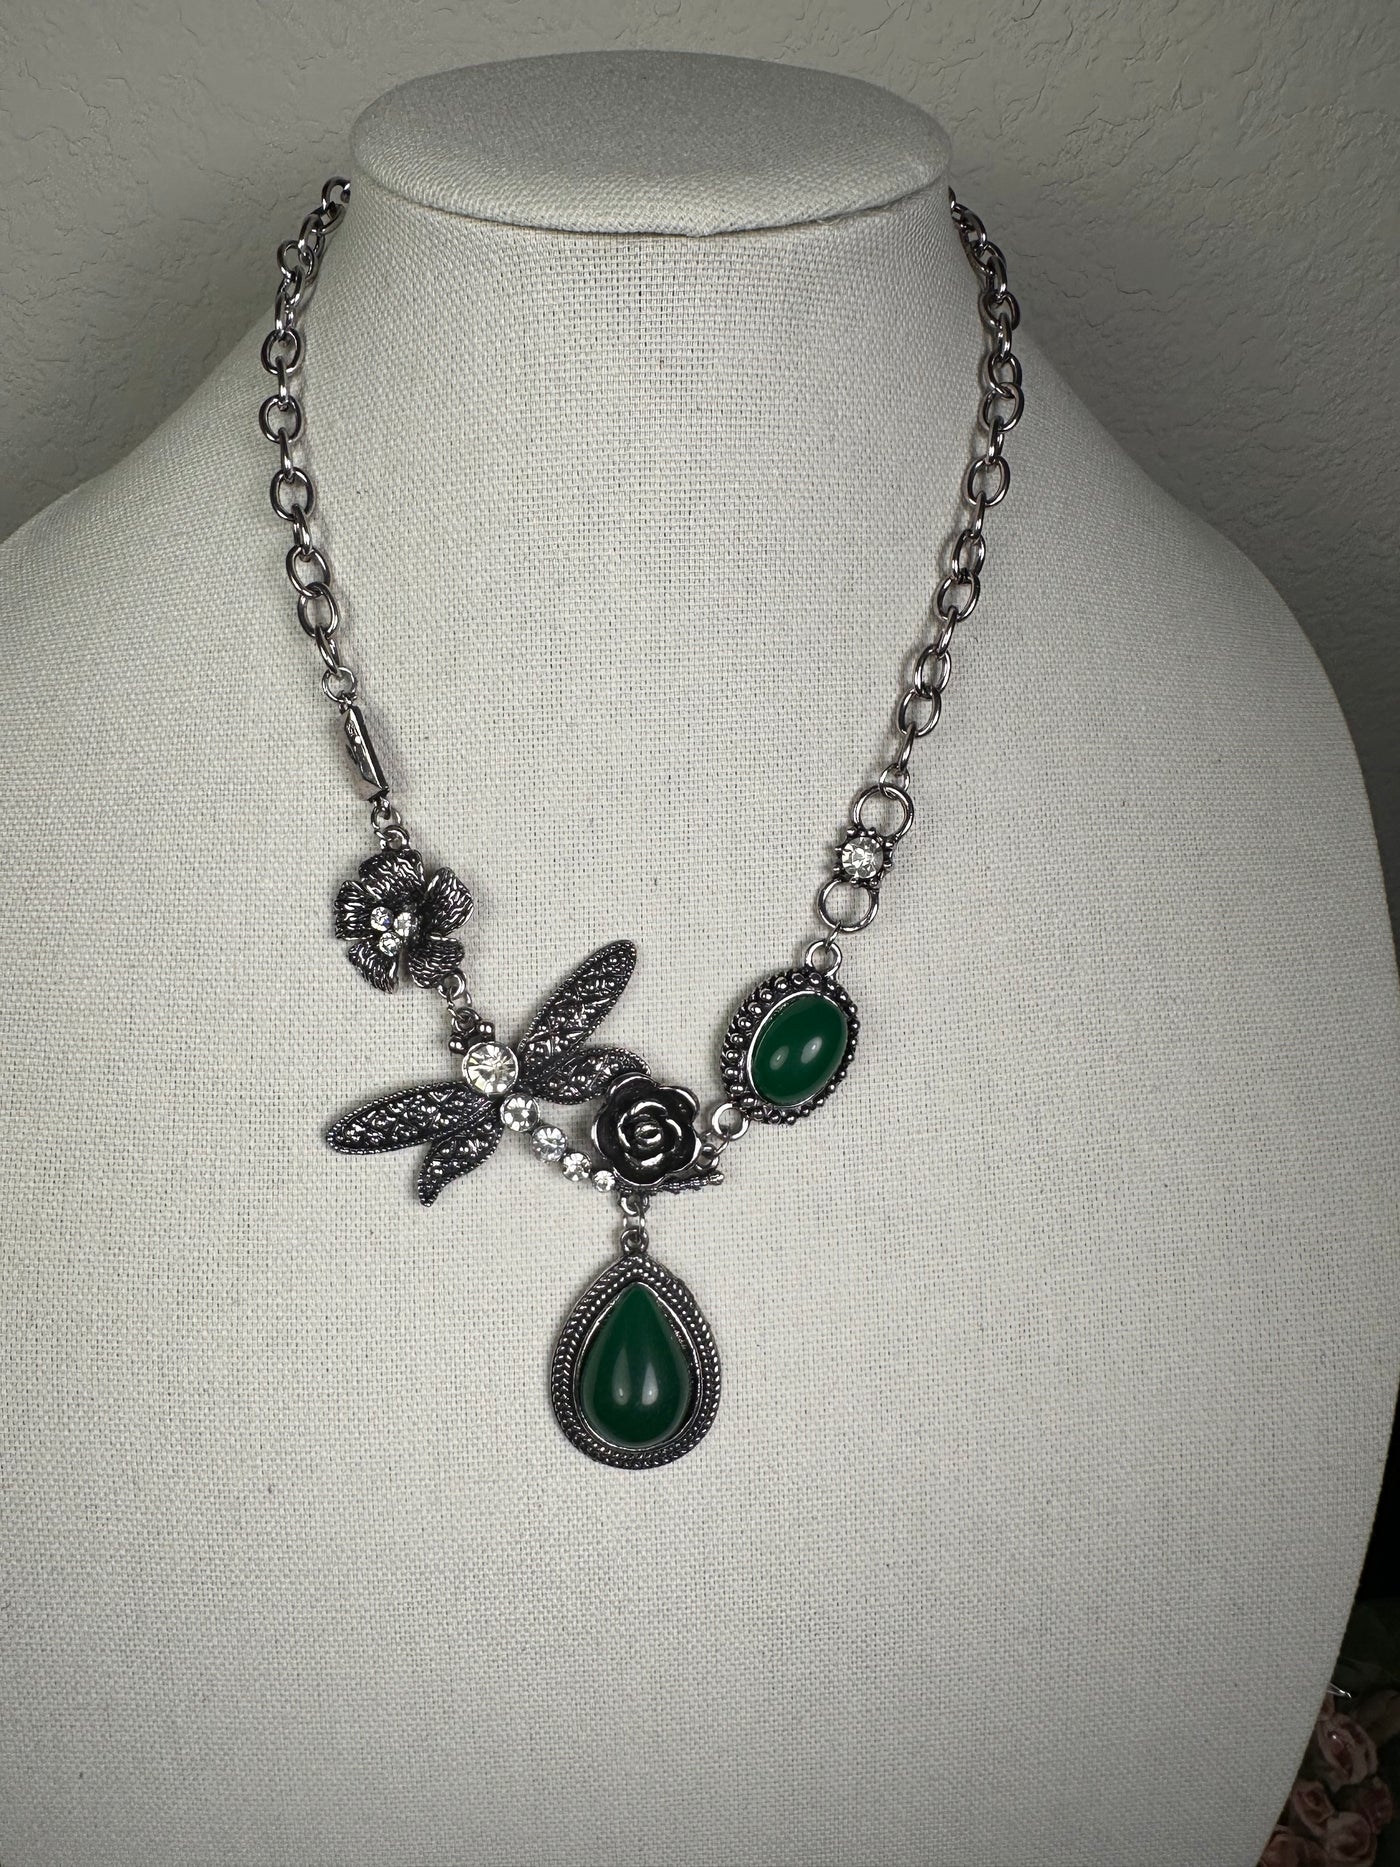 Silver Tone Green Agate Howlite Necklace Featuring Dragonfly